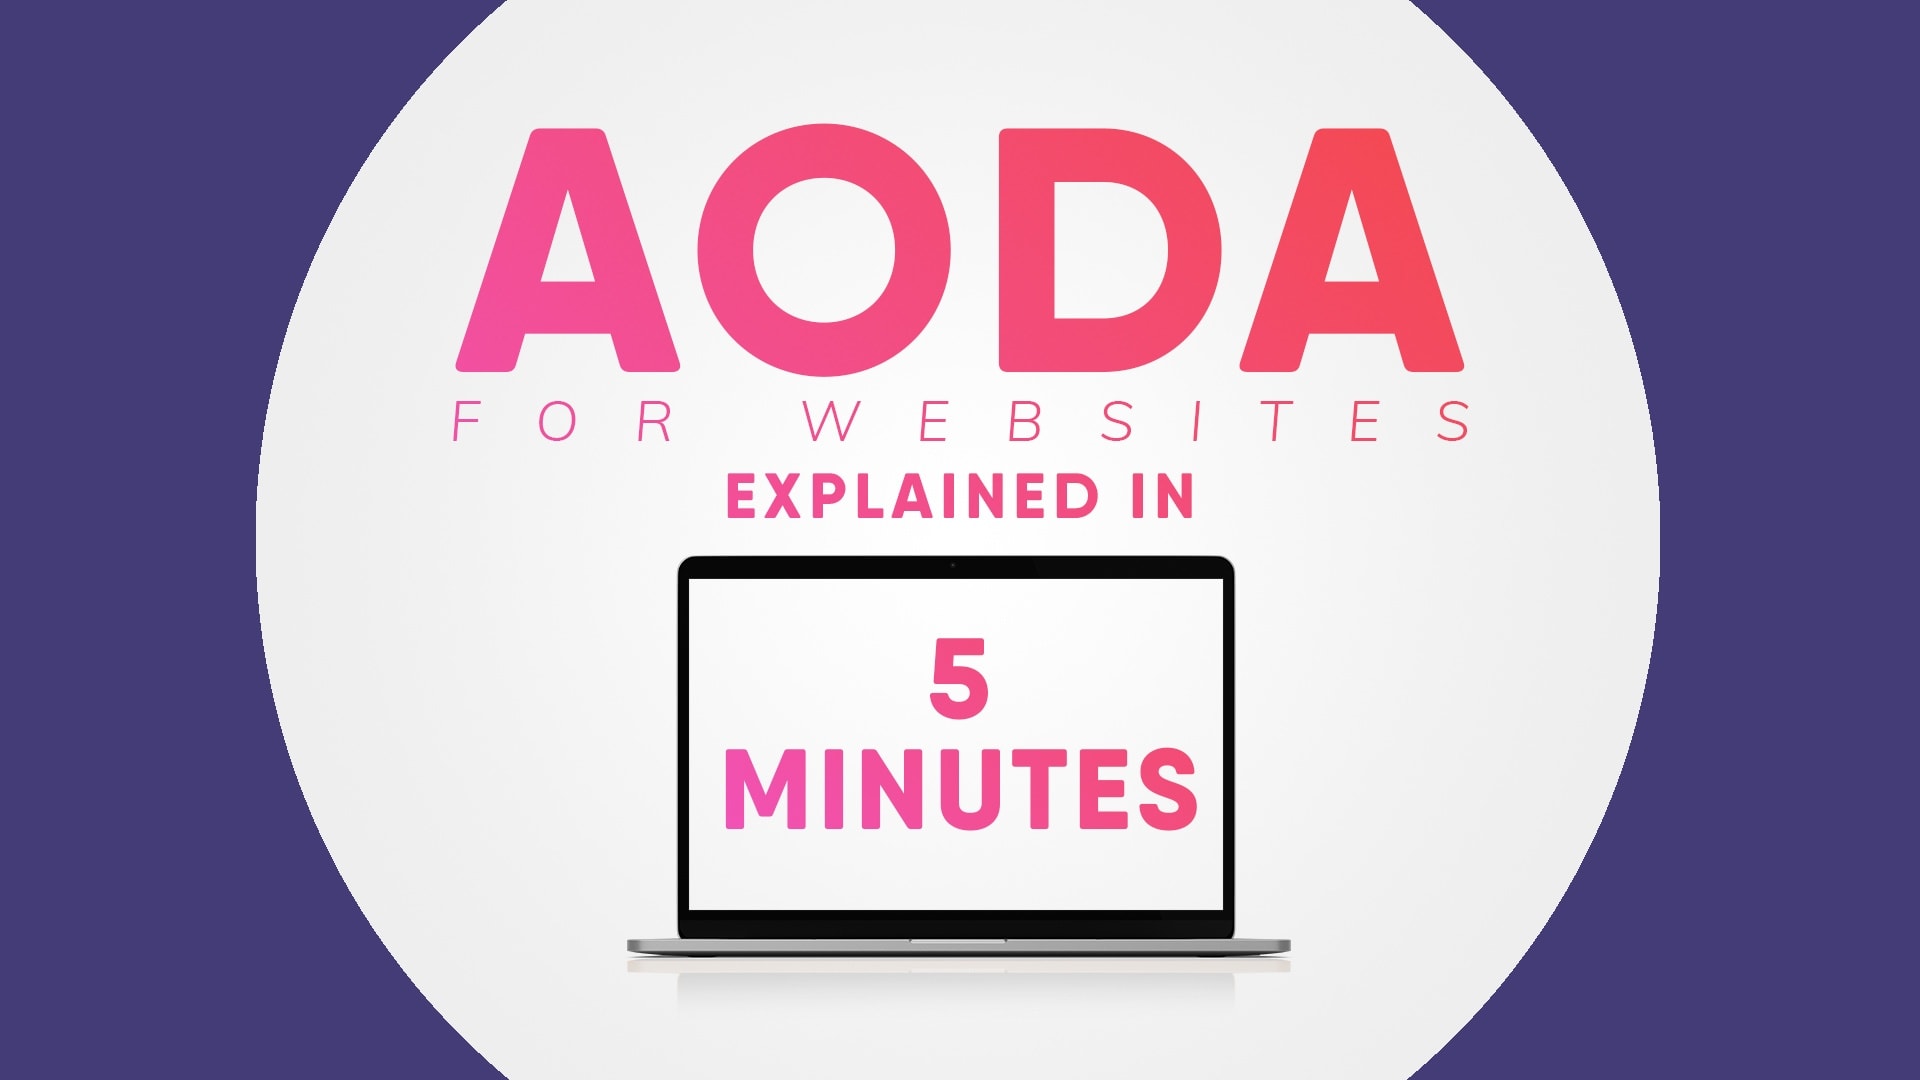 AODA explained in 5 minutes